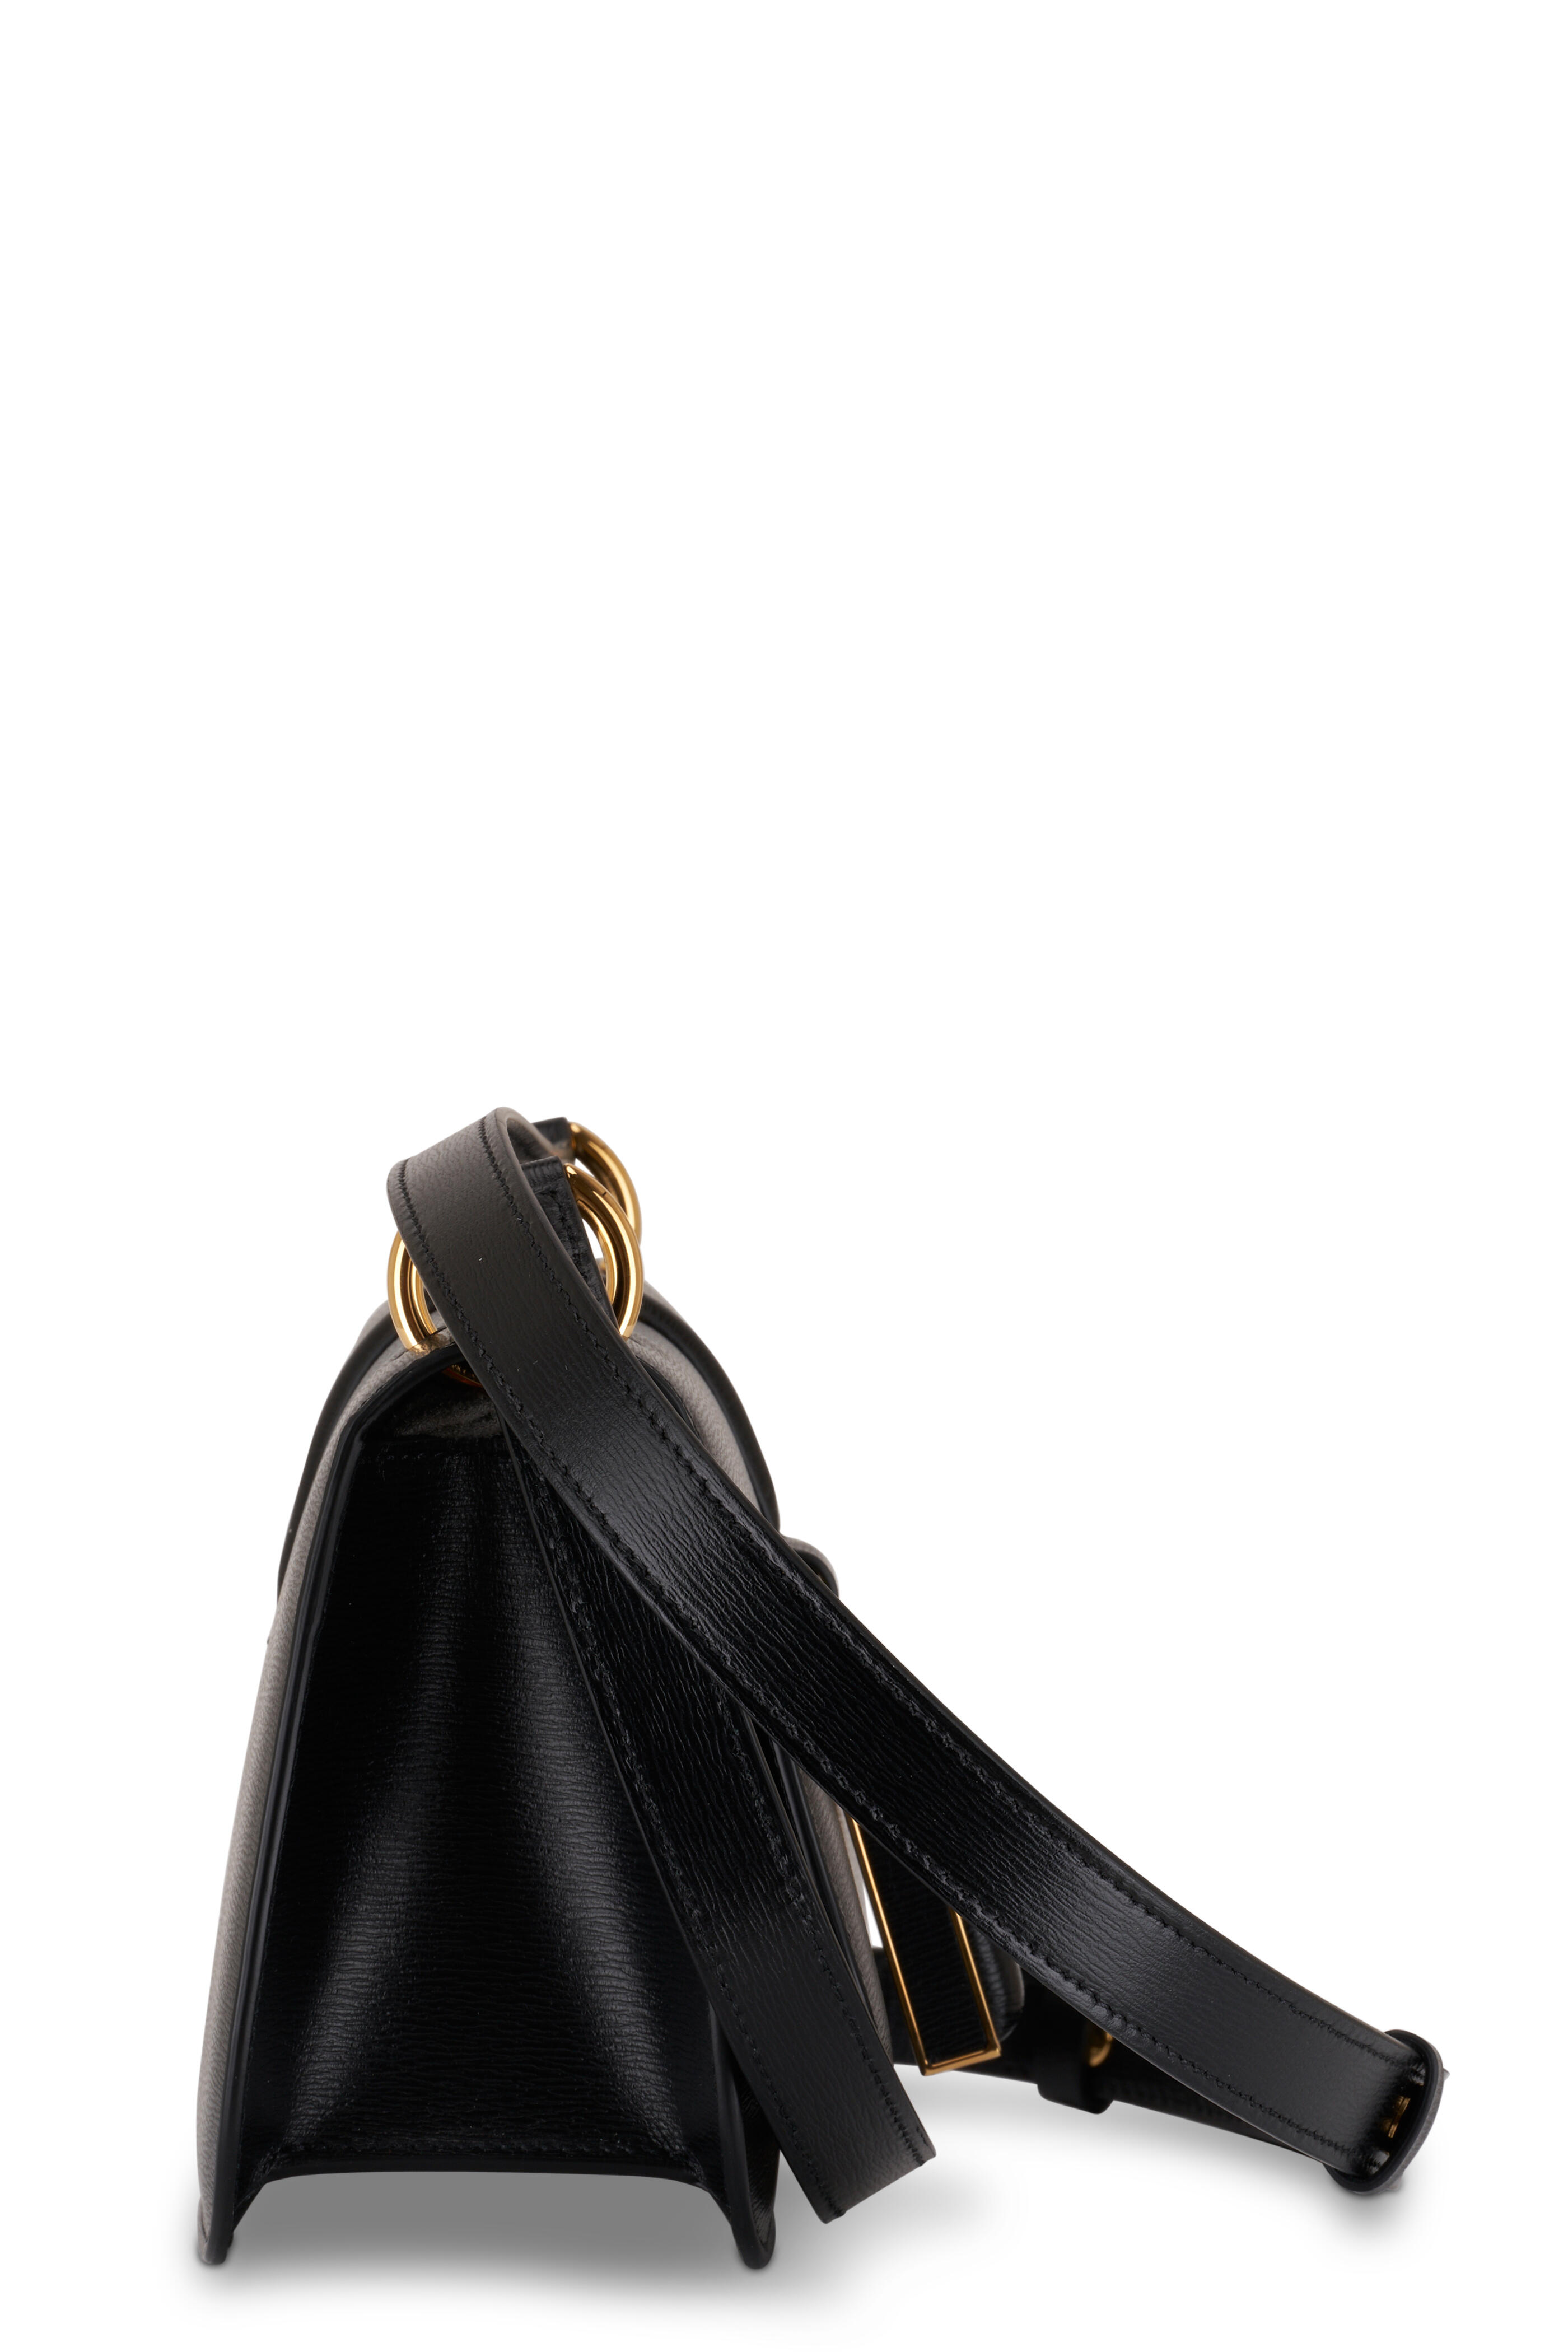 Tom Ford Black Leather Lock Flat Foldover Bag with Gold Hardware., Lot  #64744